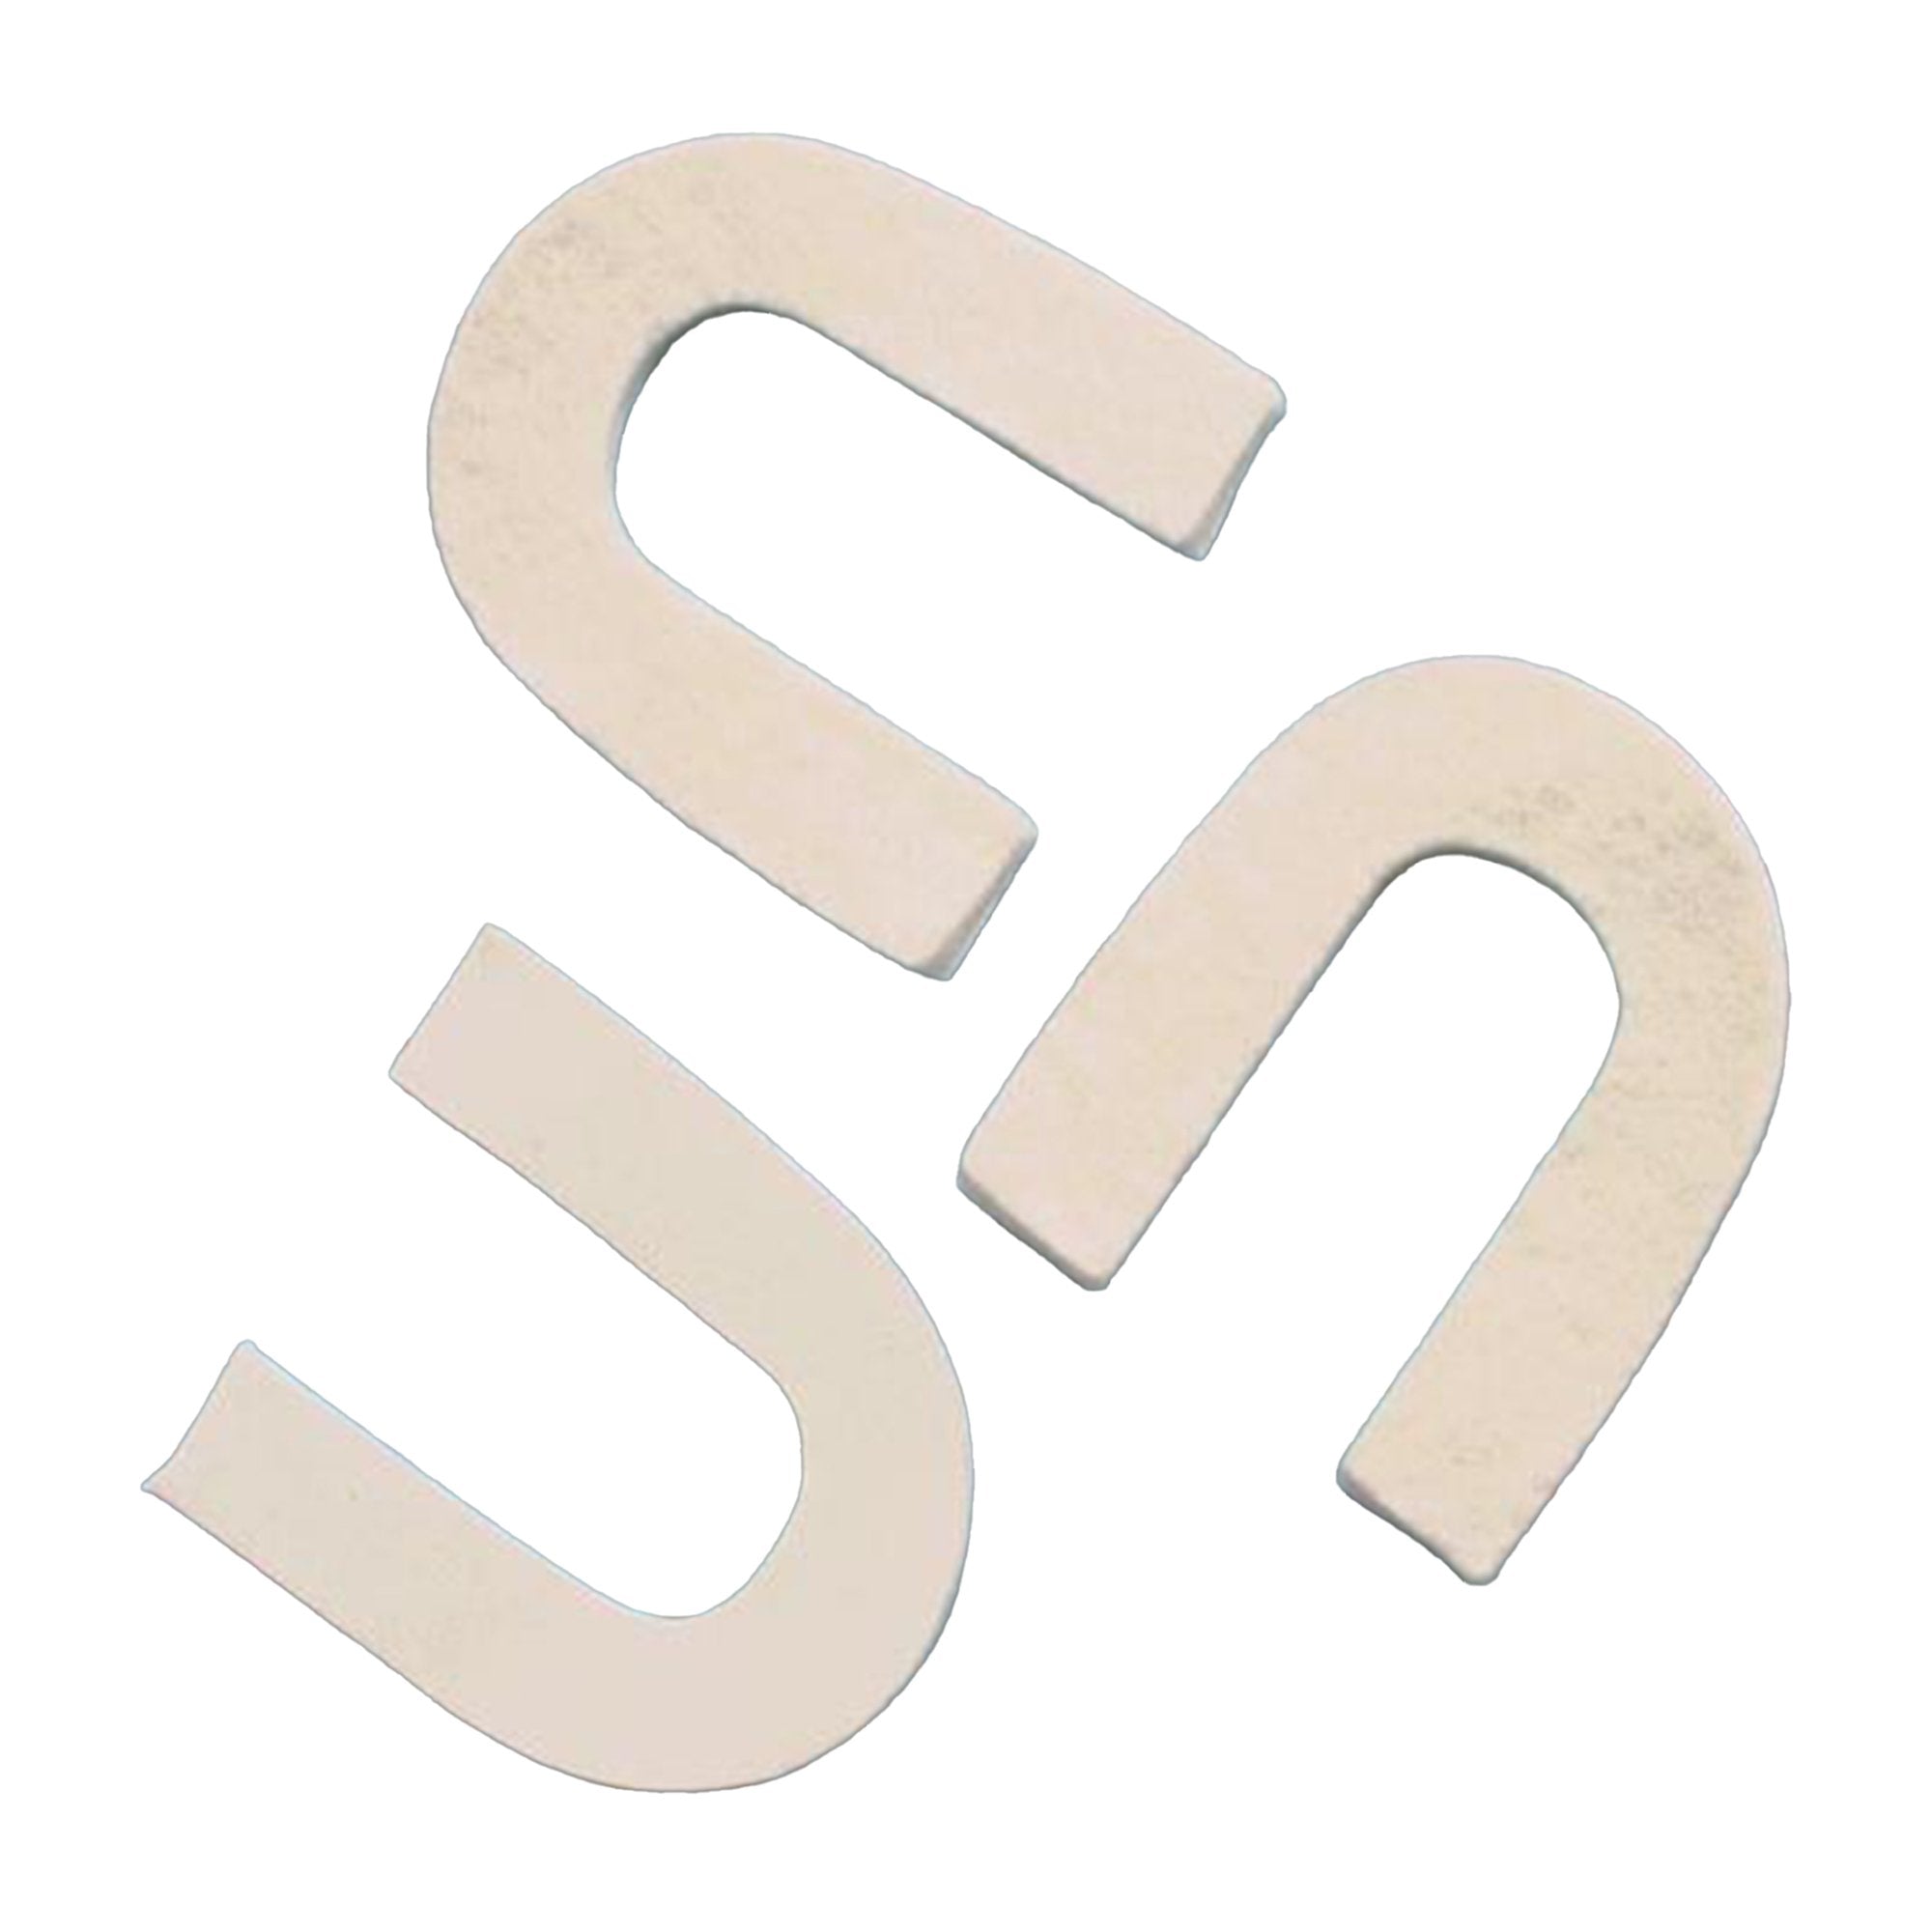 McKesson Heel Spur Pad, One Size Fits Most (12 Units)